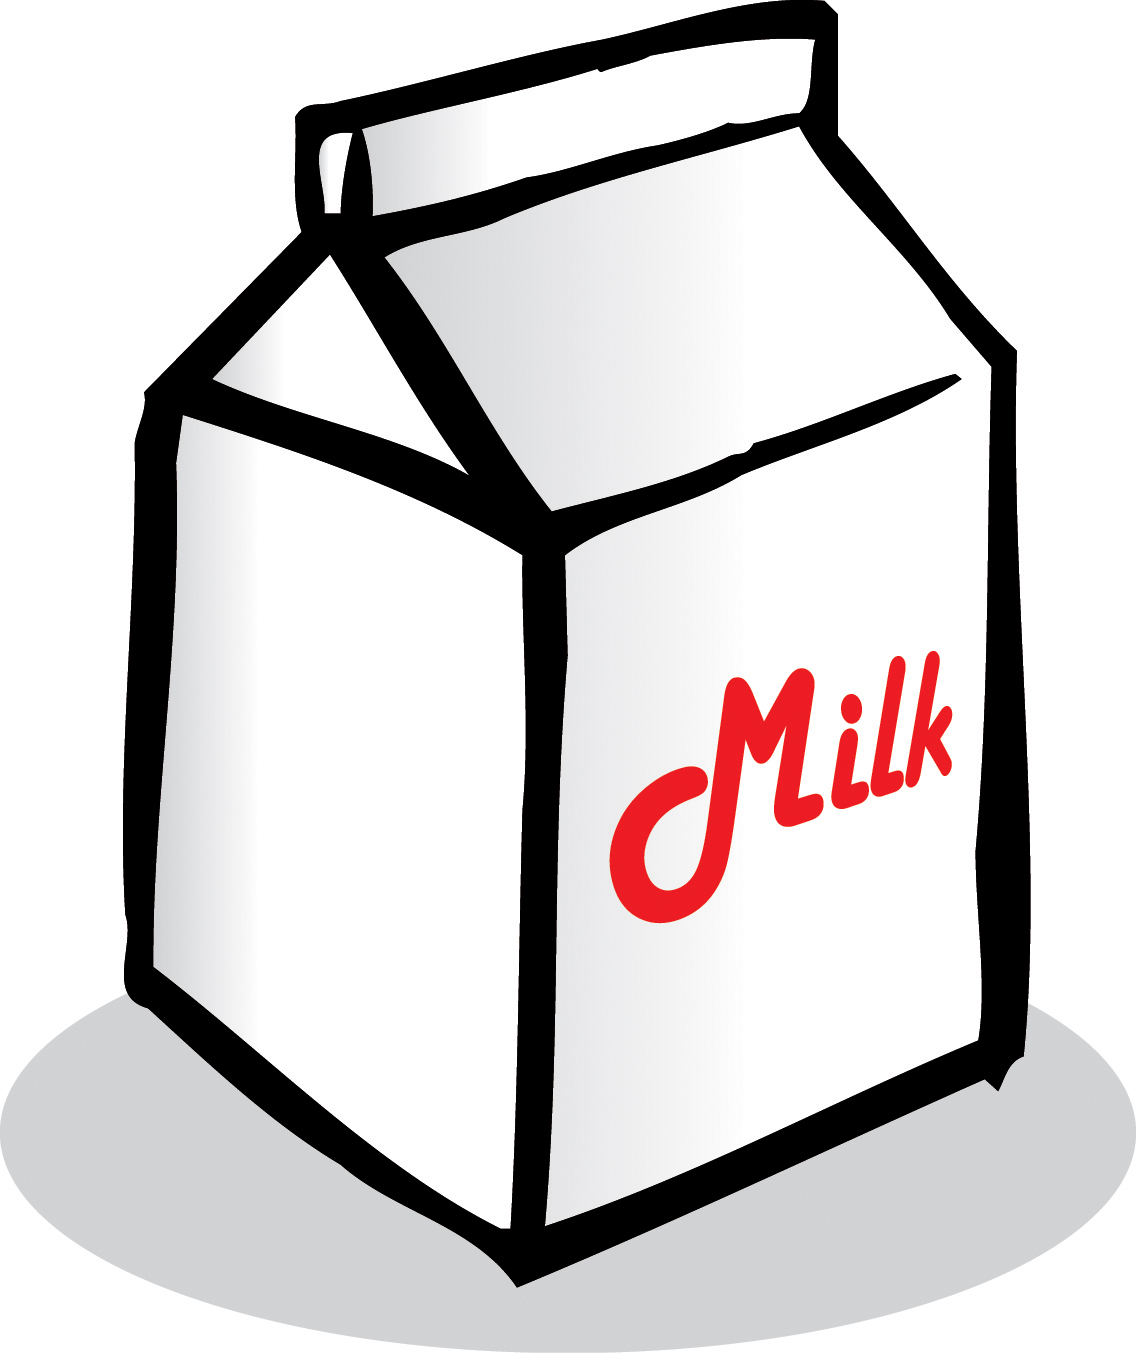 The Milk Carton Is An Example Of Continued Bad Package Design  The